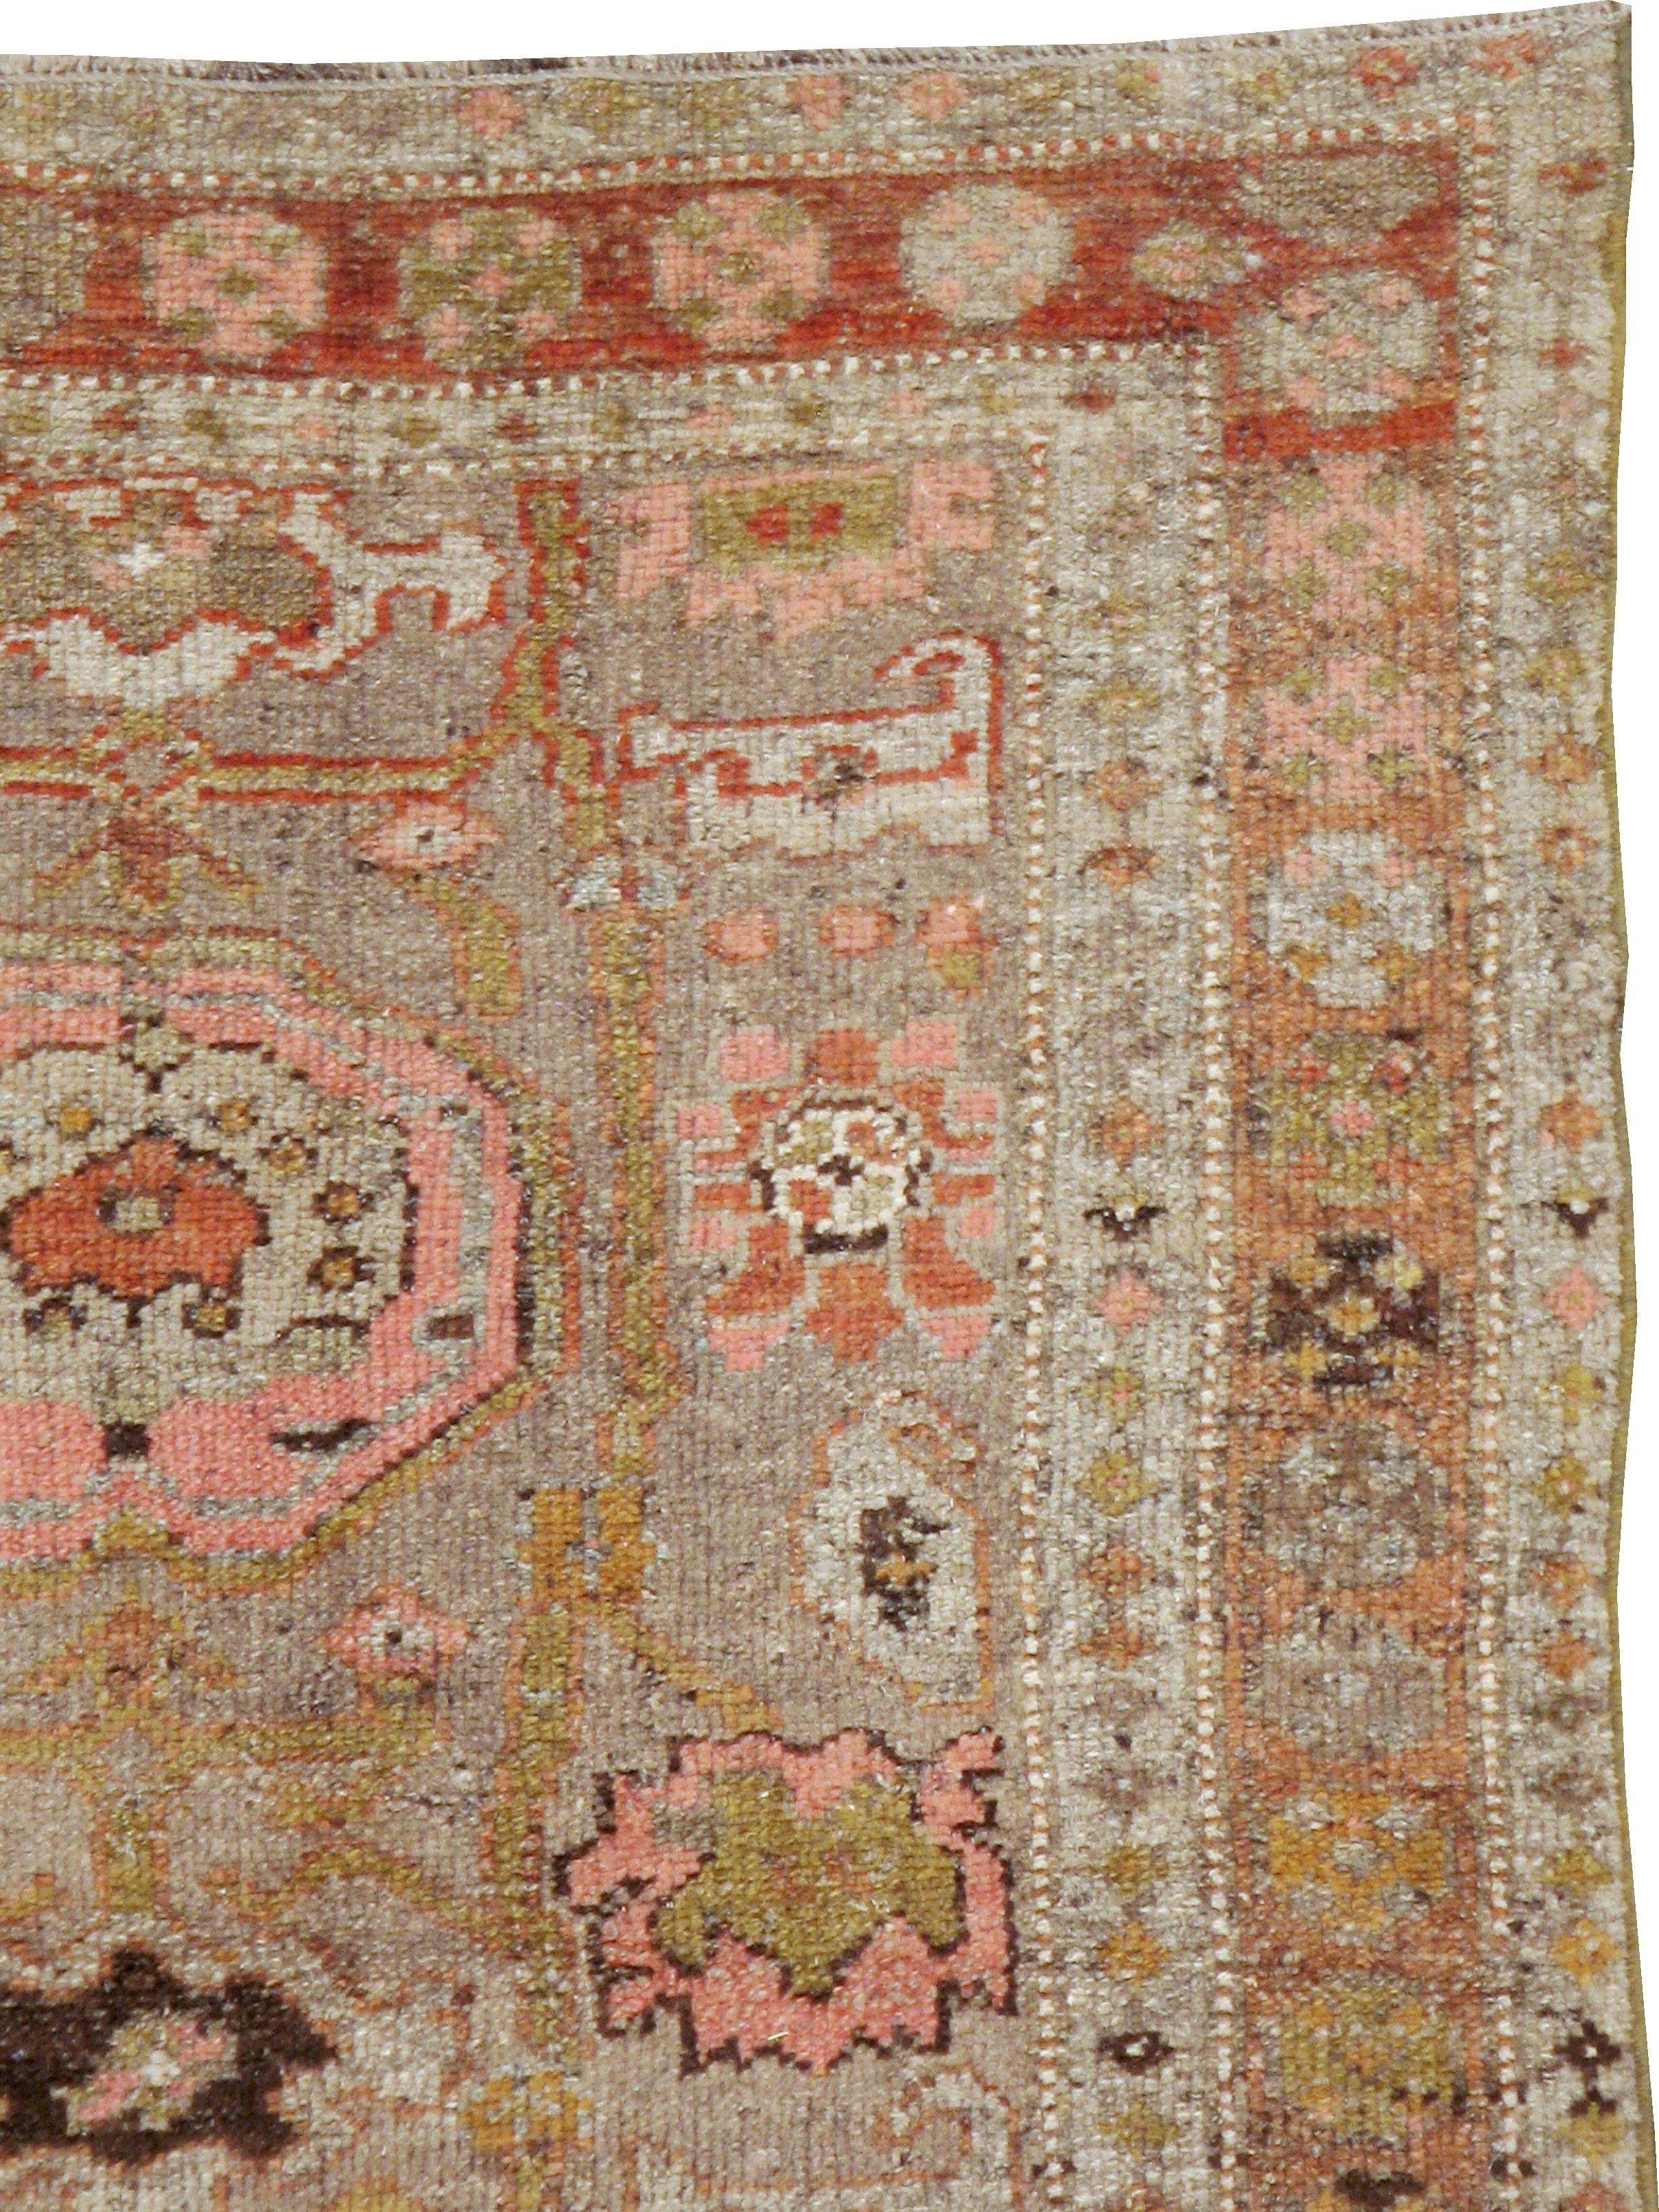 An antique Persian Kurdish rug from the turn of the 20th century.